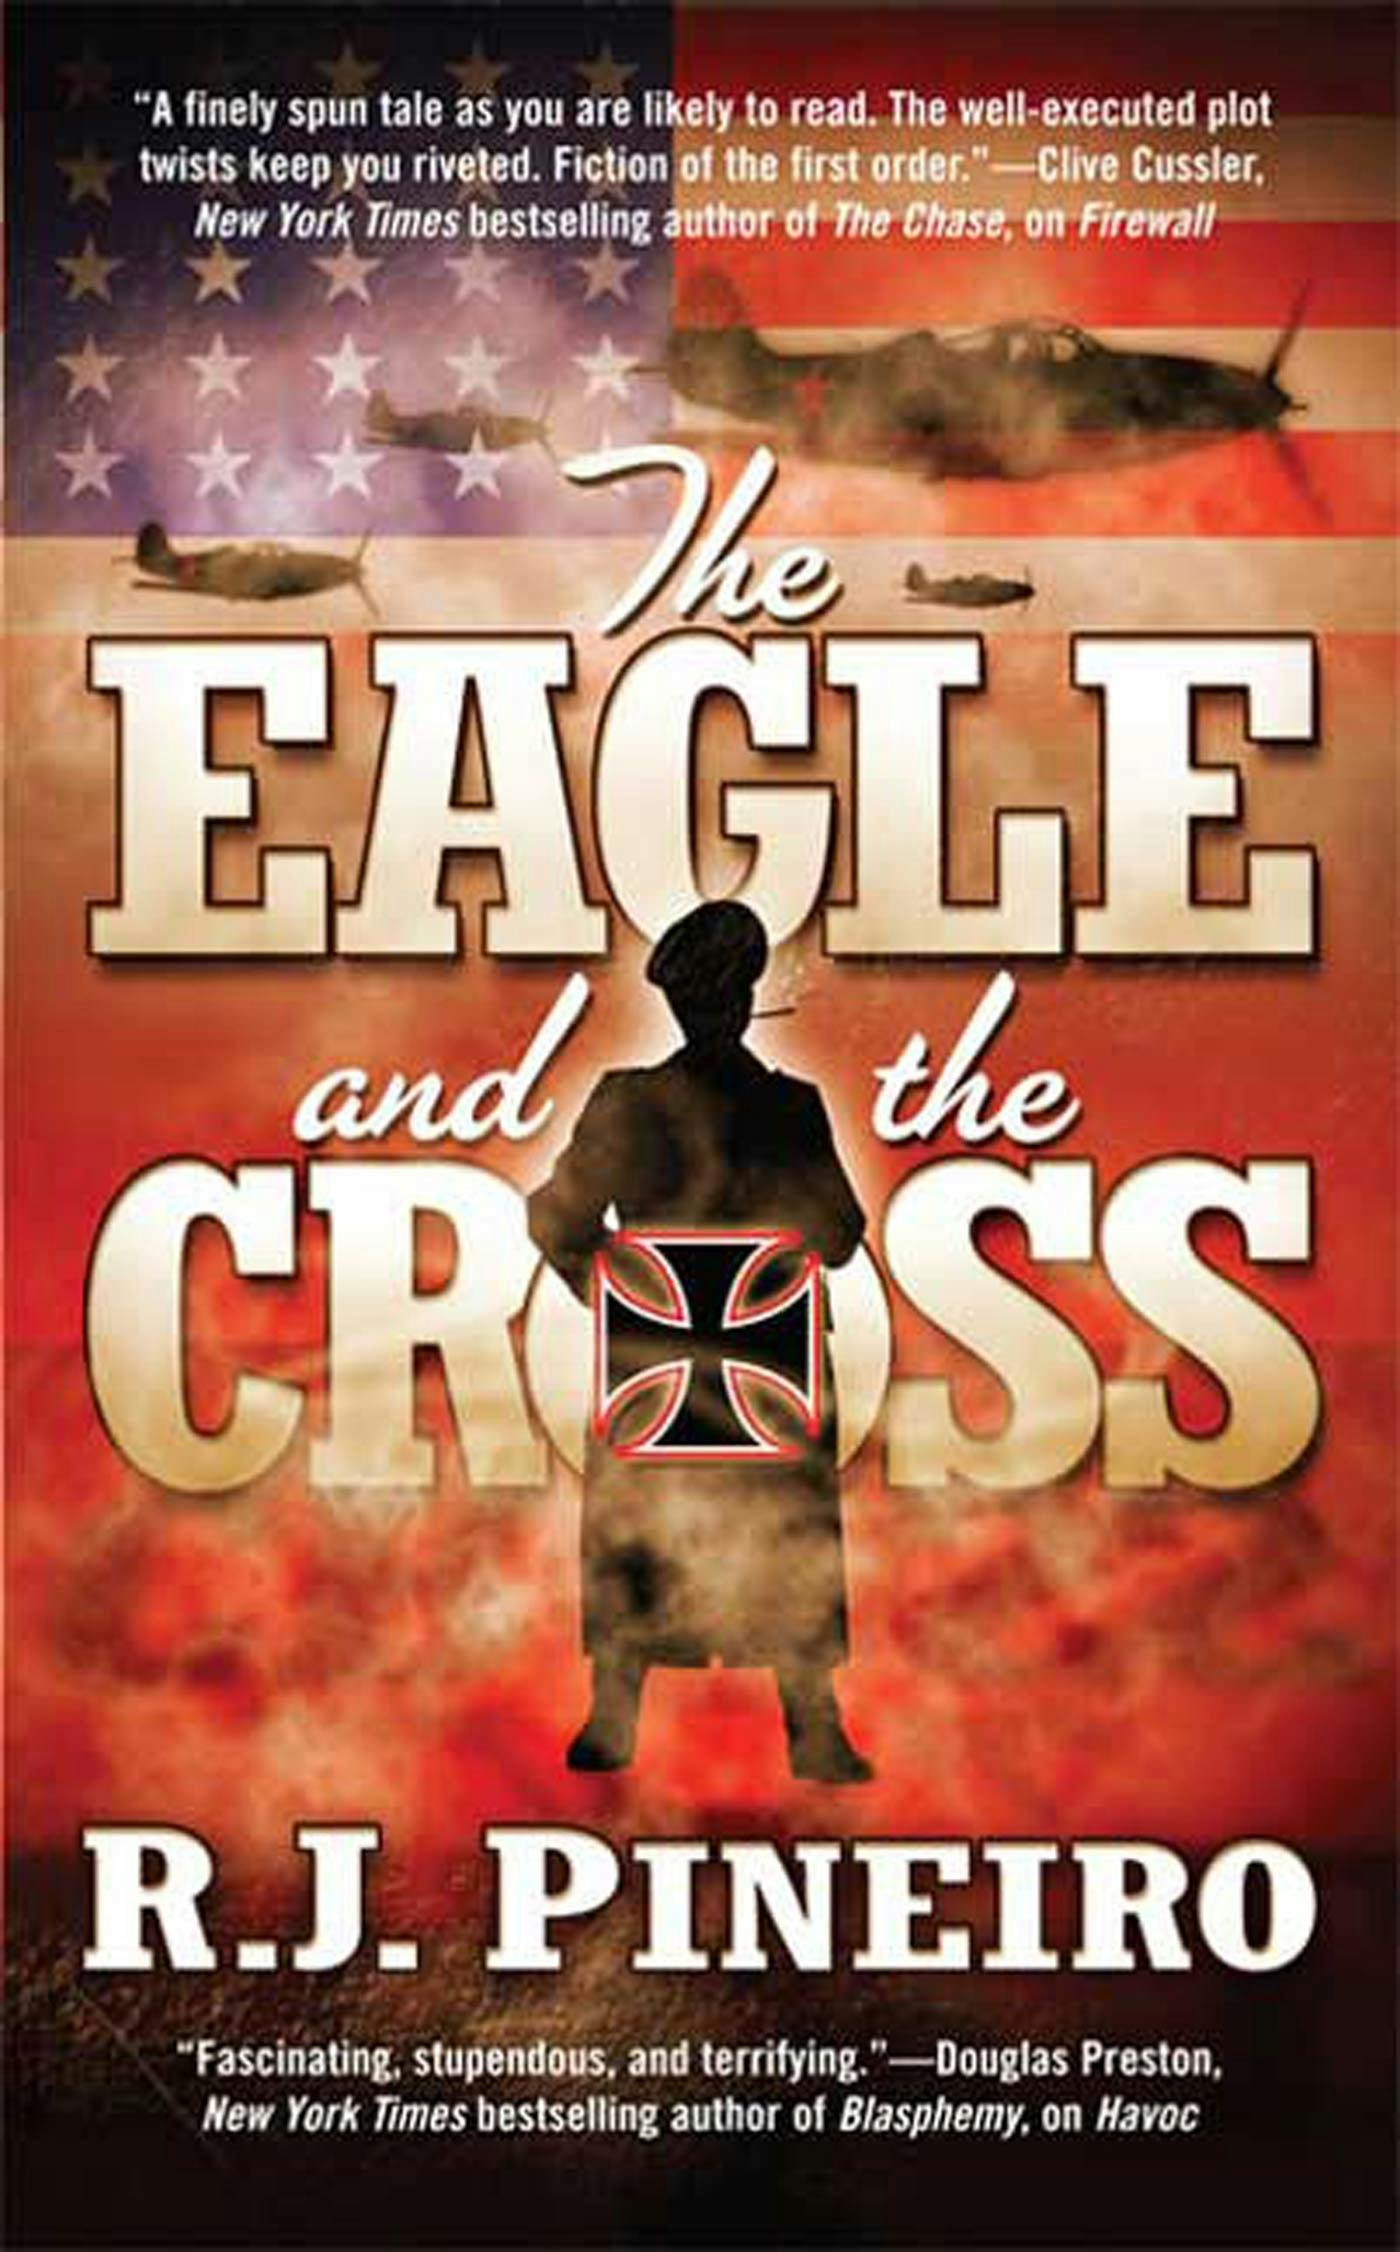 Cover for the book titled as: The Eagle and the Cross